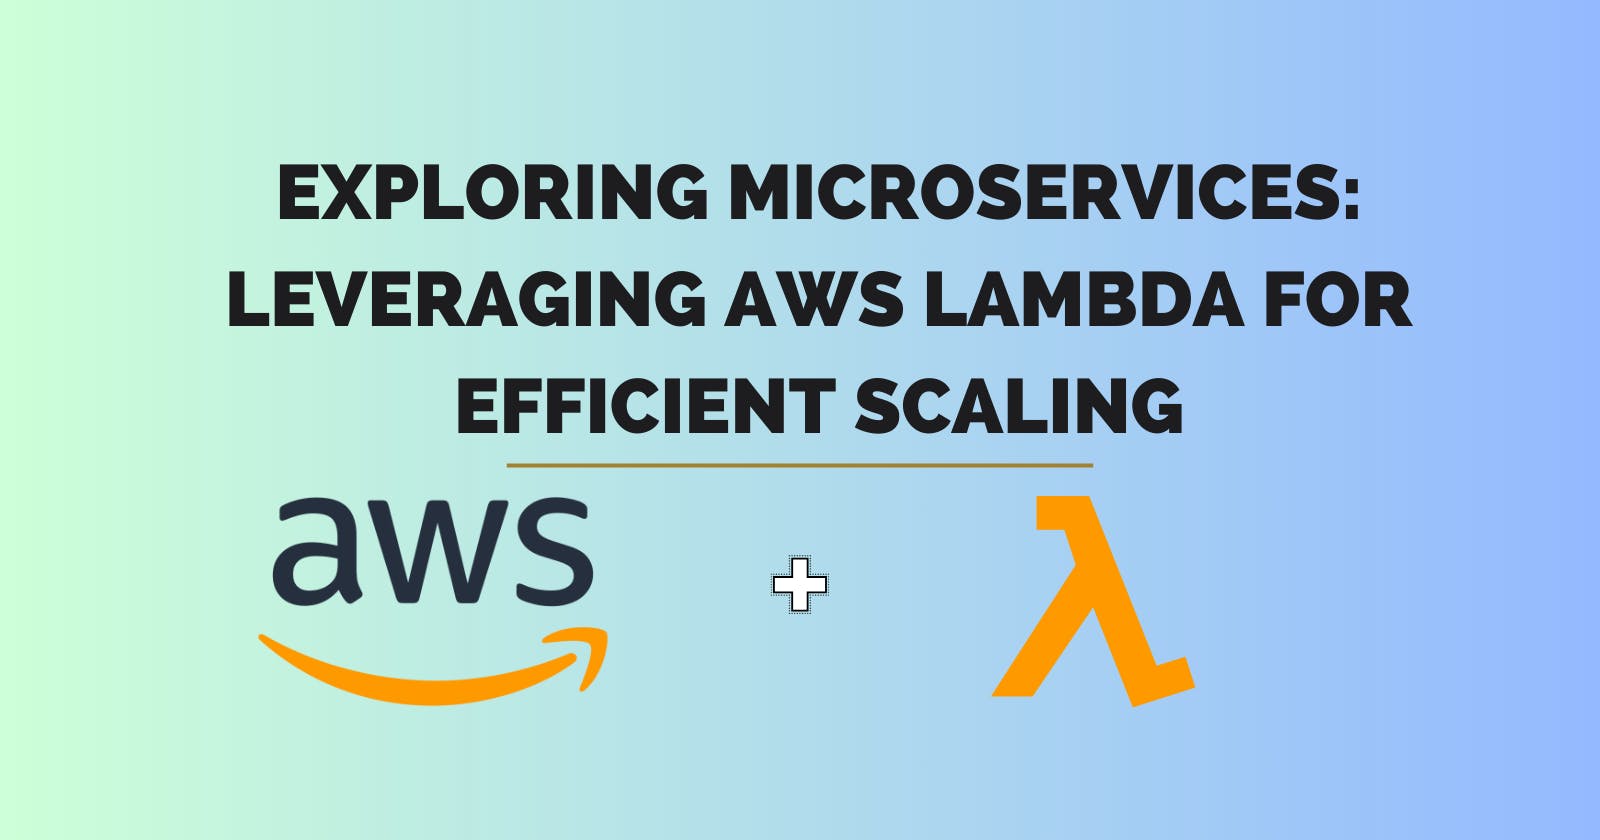 Exploring Microservices: Leveraging AWS Lambda for Efficient Scaling